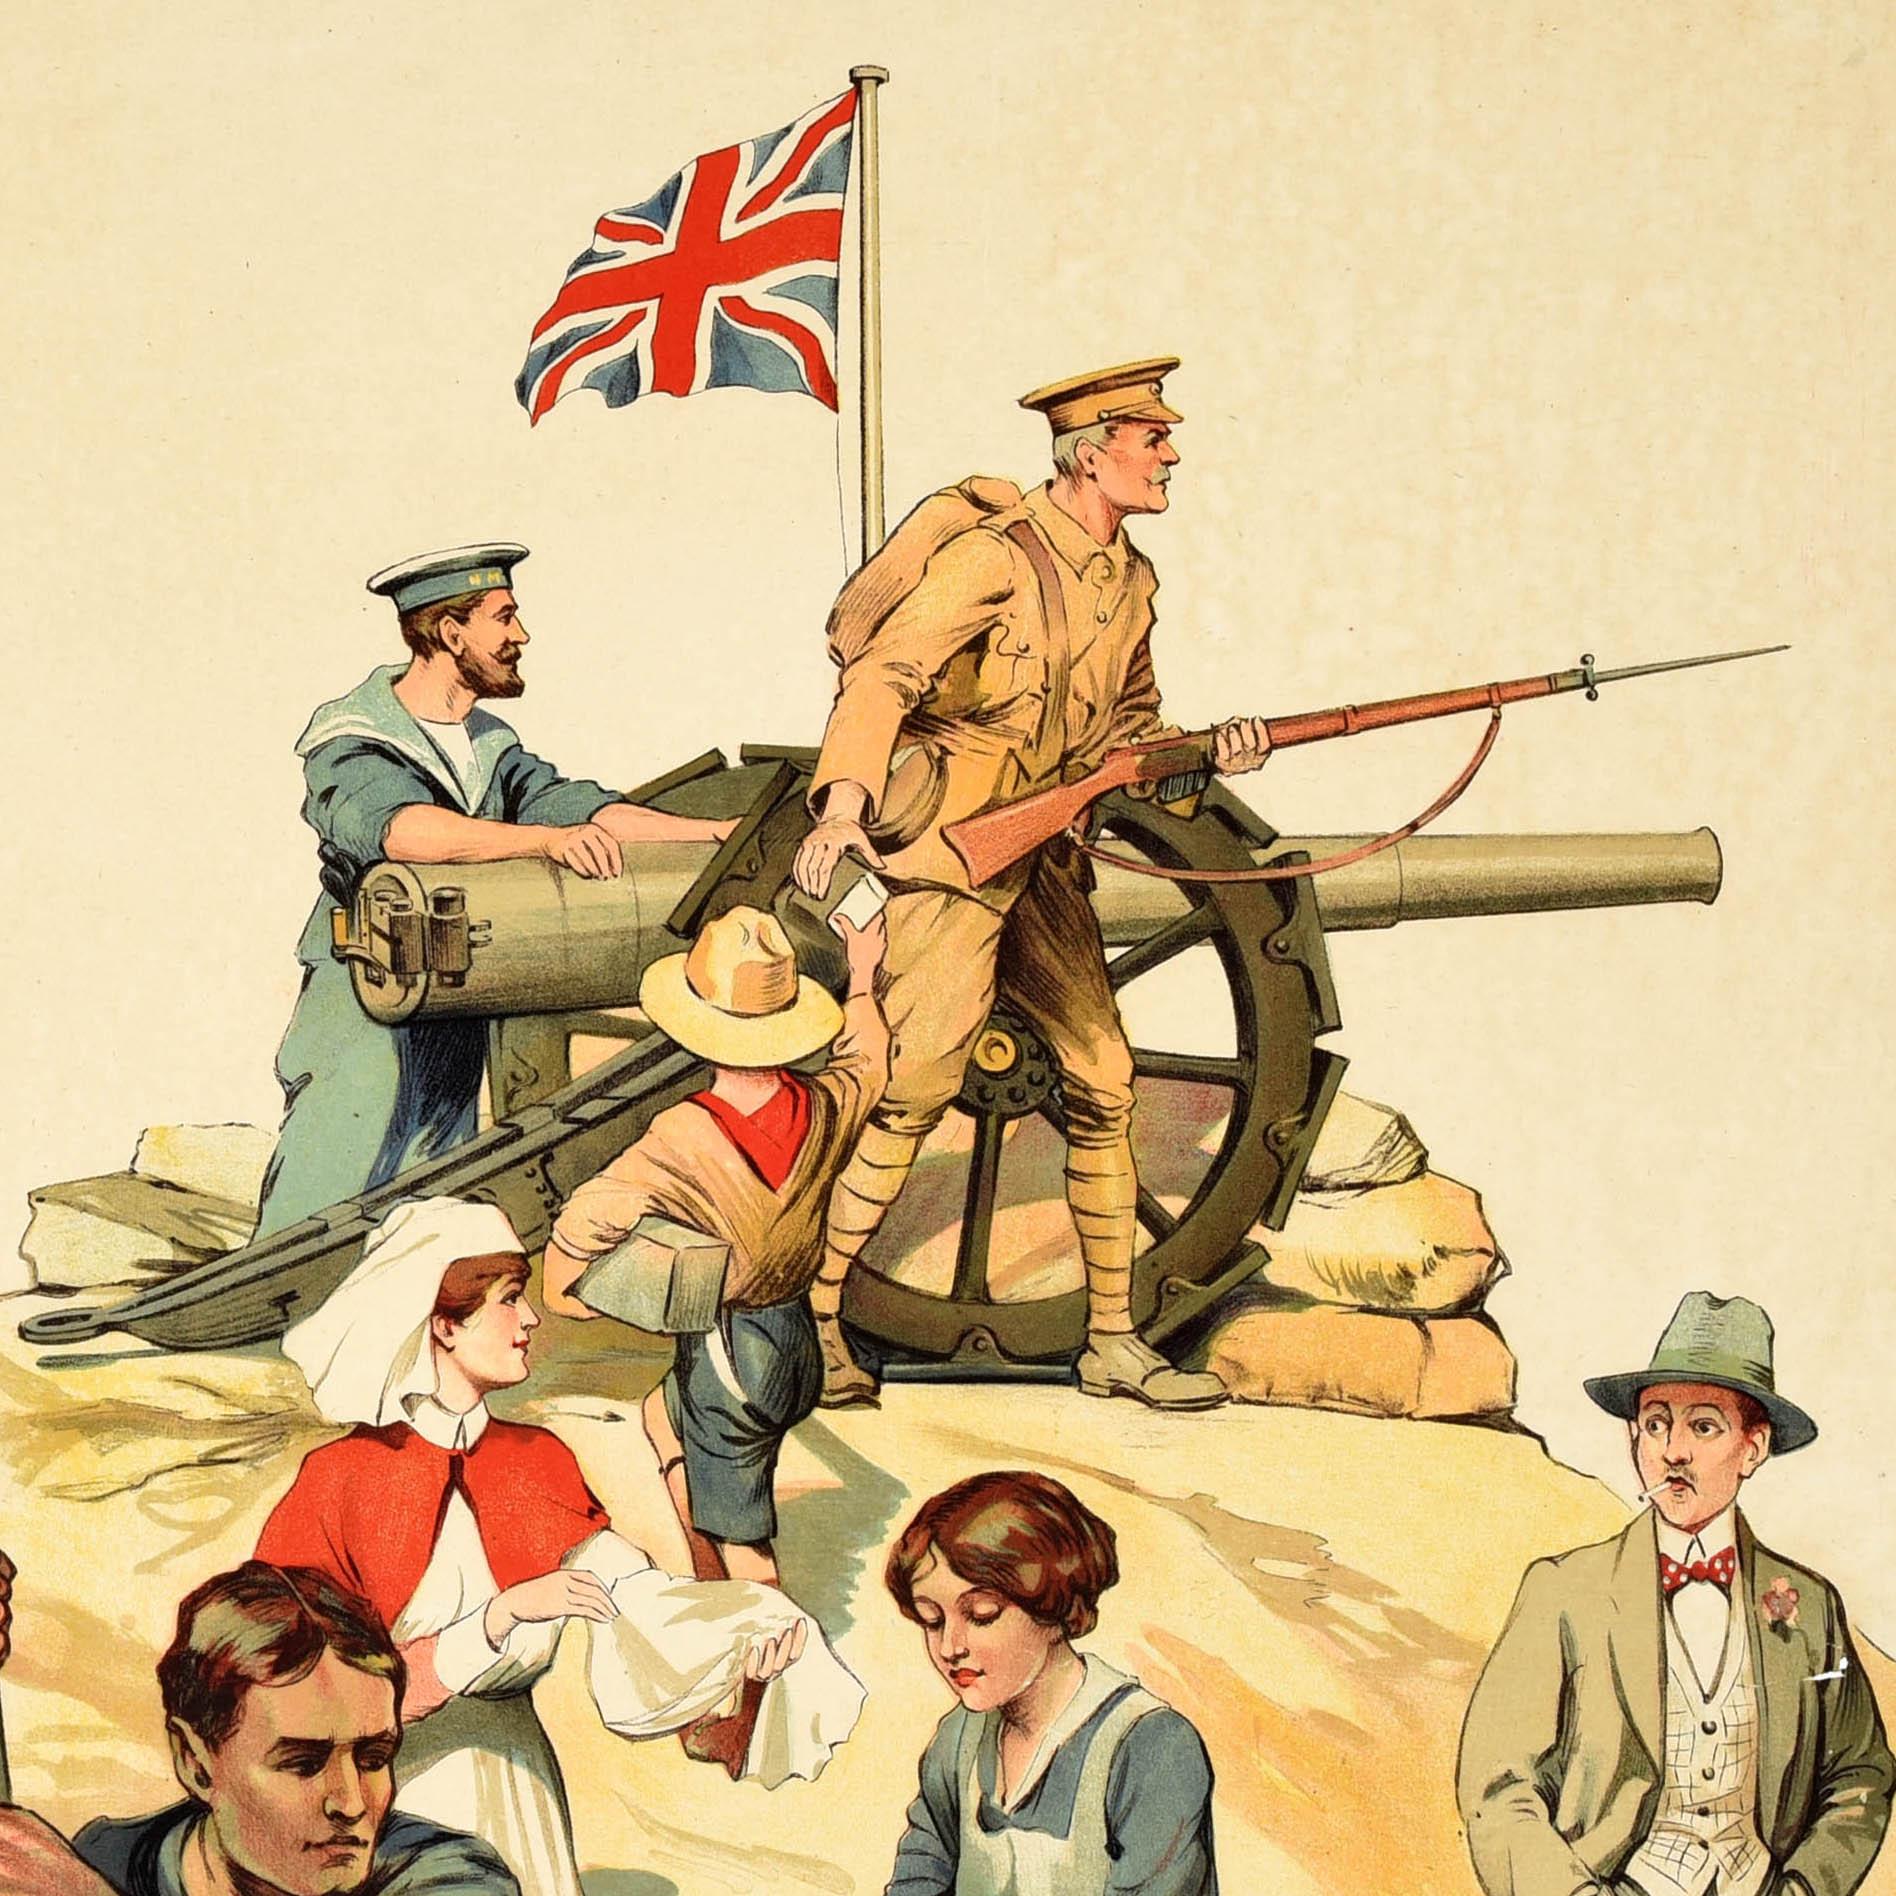 Original antique British World War One recruitment propaganda poster - Are YOU in this? Designed by the British Army officer and founder of the Boy Scouts and Girl Guides Lt. Gen. Sir R. S. S. Baden Powell (Robert Stephenson Smyth Baden-Powell;